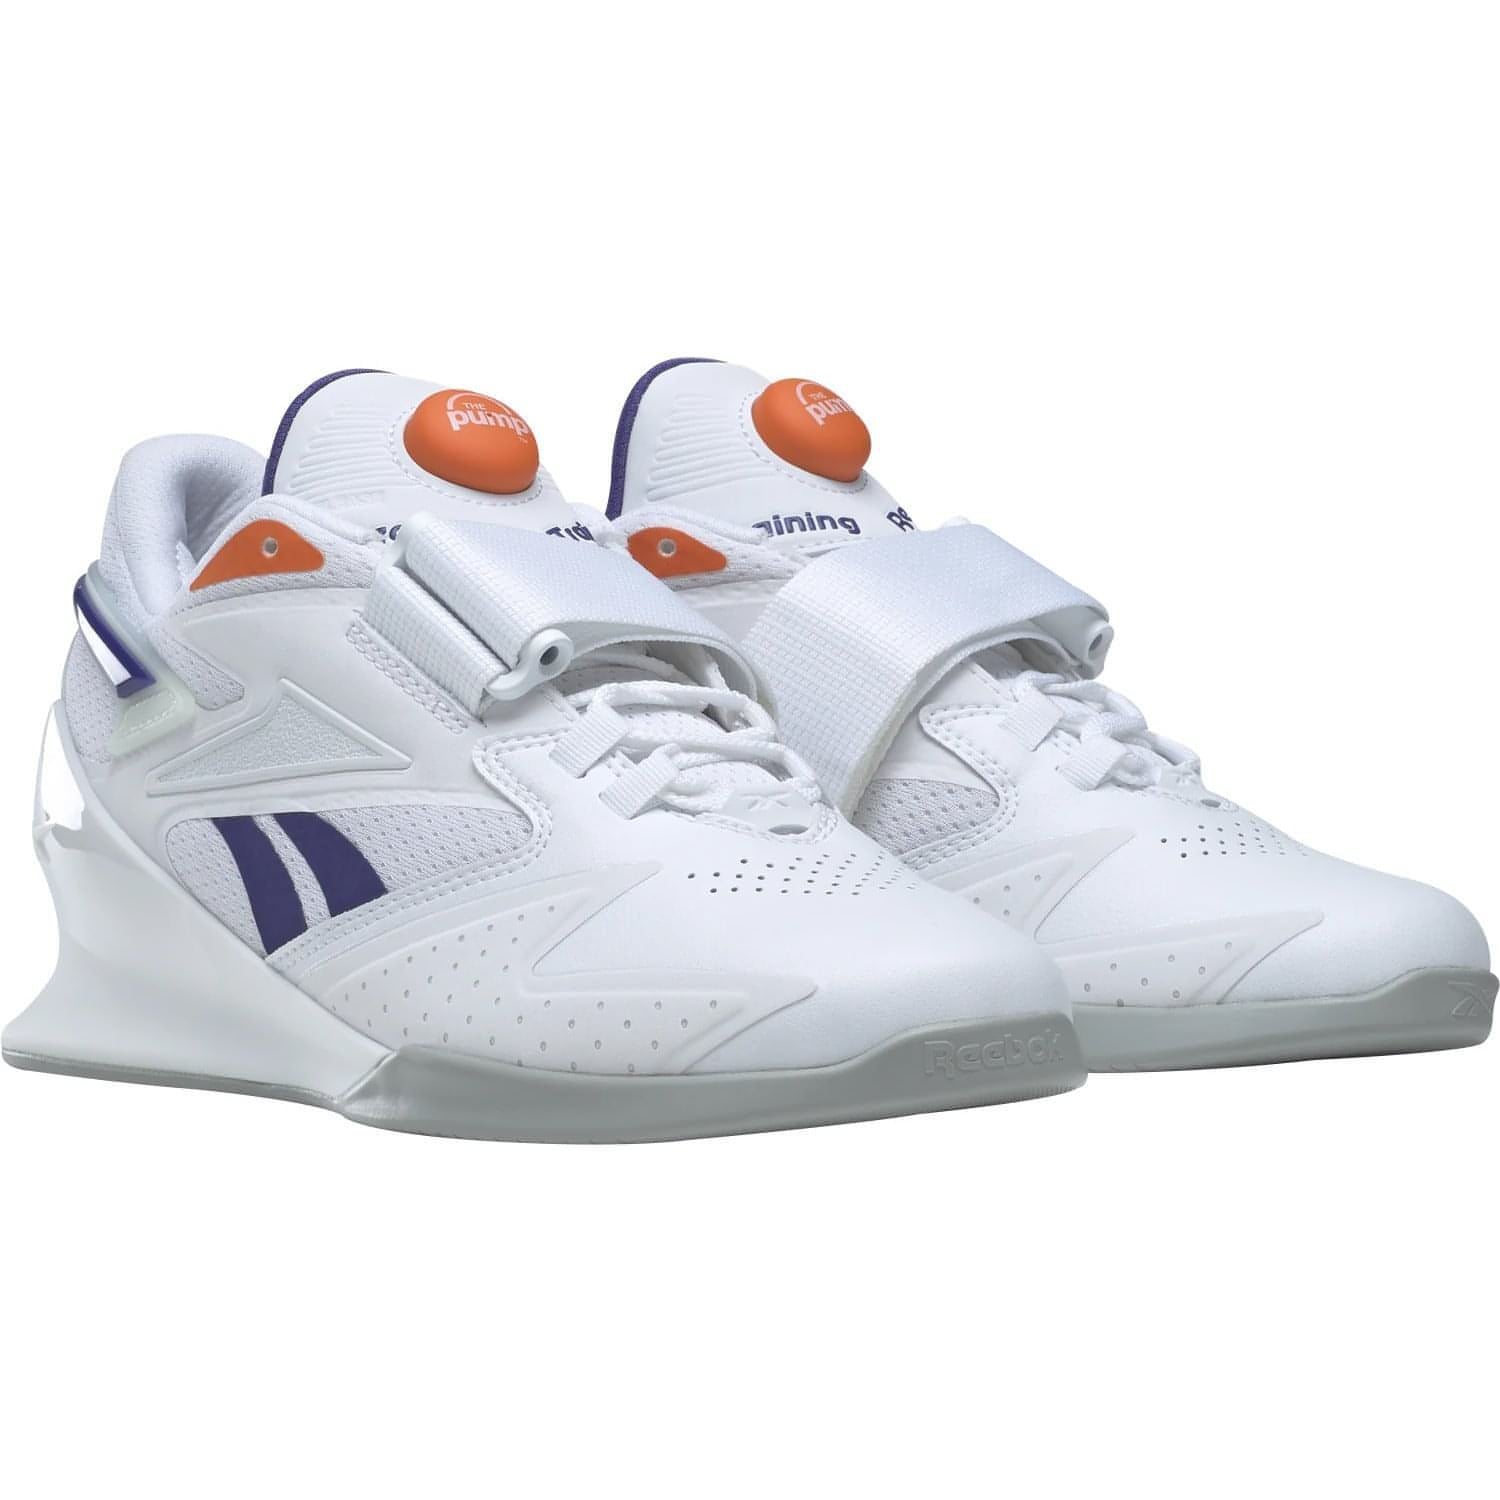 Reebok Legacy Lifter Iii Hp9236 Front - Front View